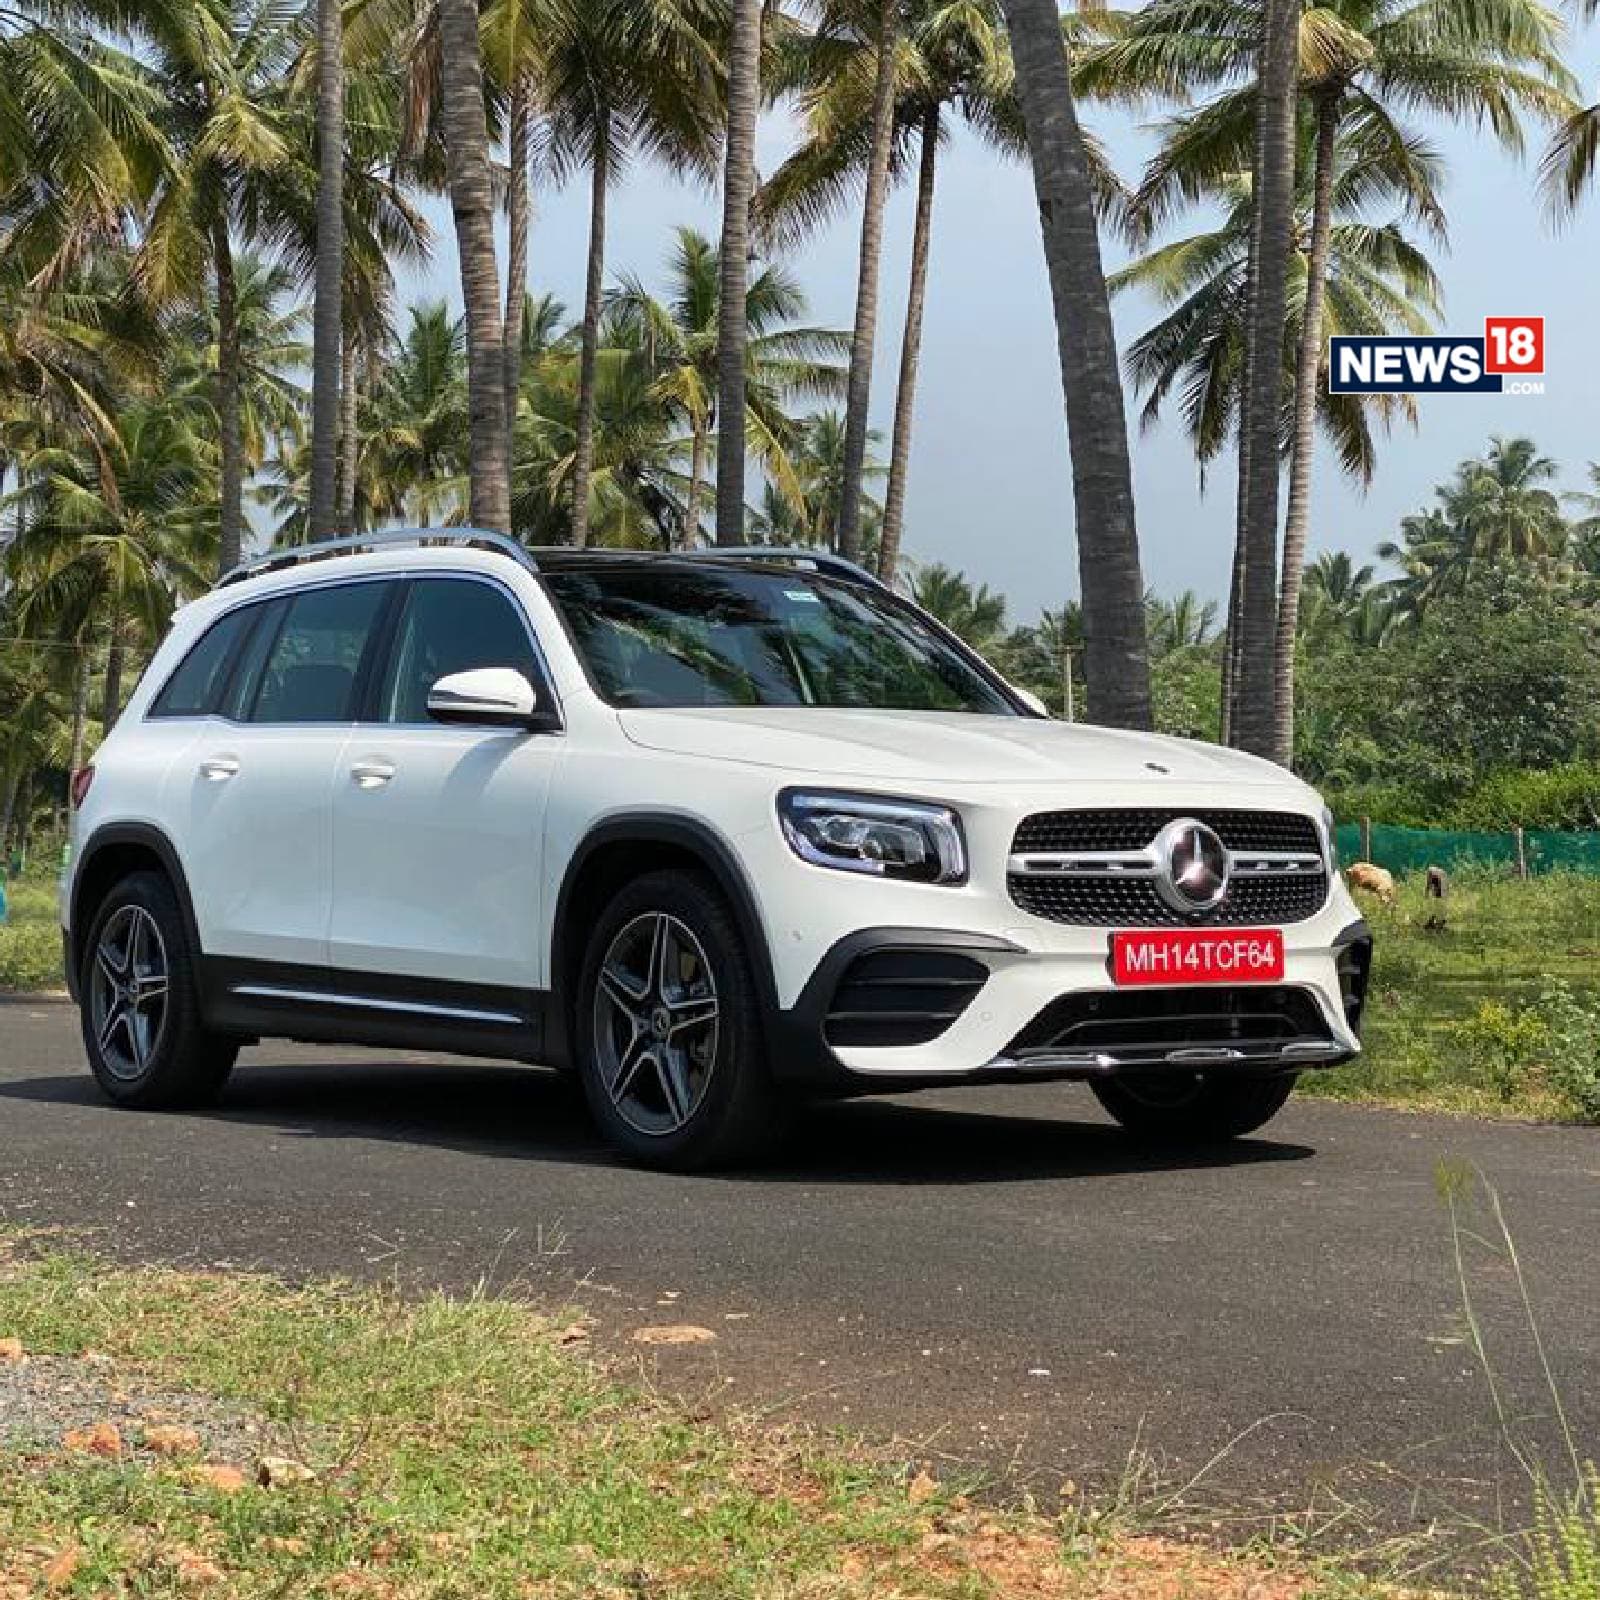 Mercedes-Benz GLB in Pics: See Design, Features, Interiors and